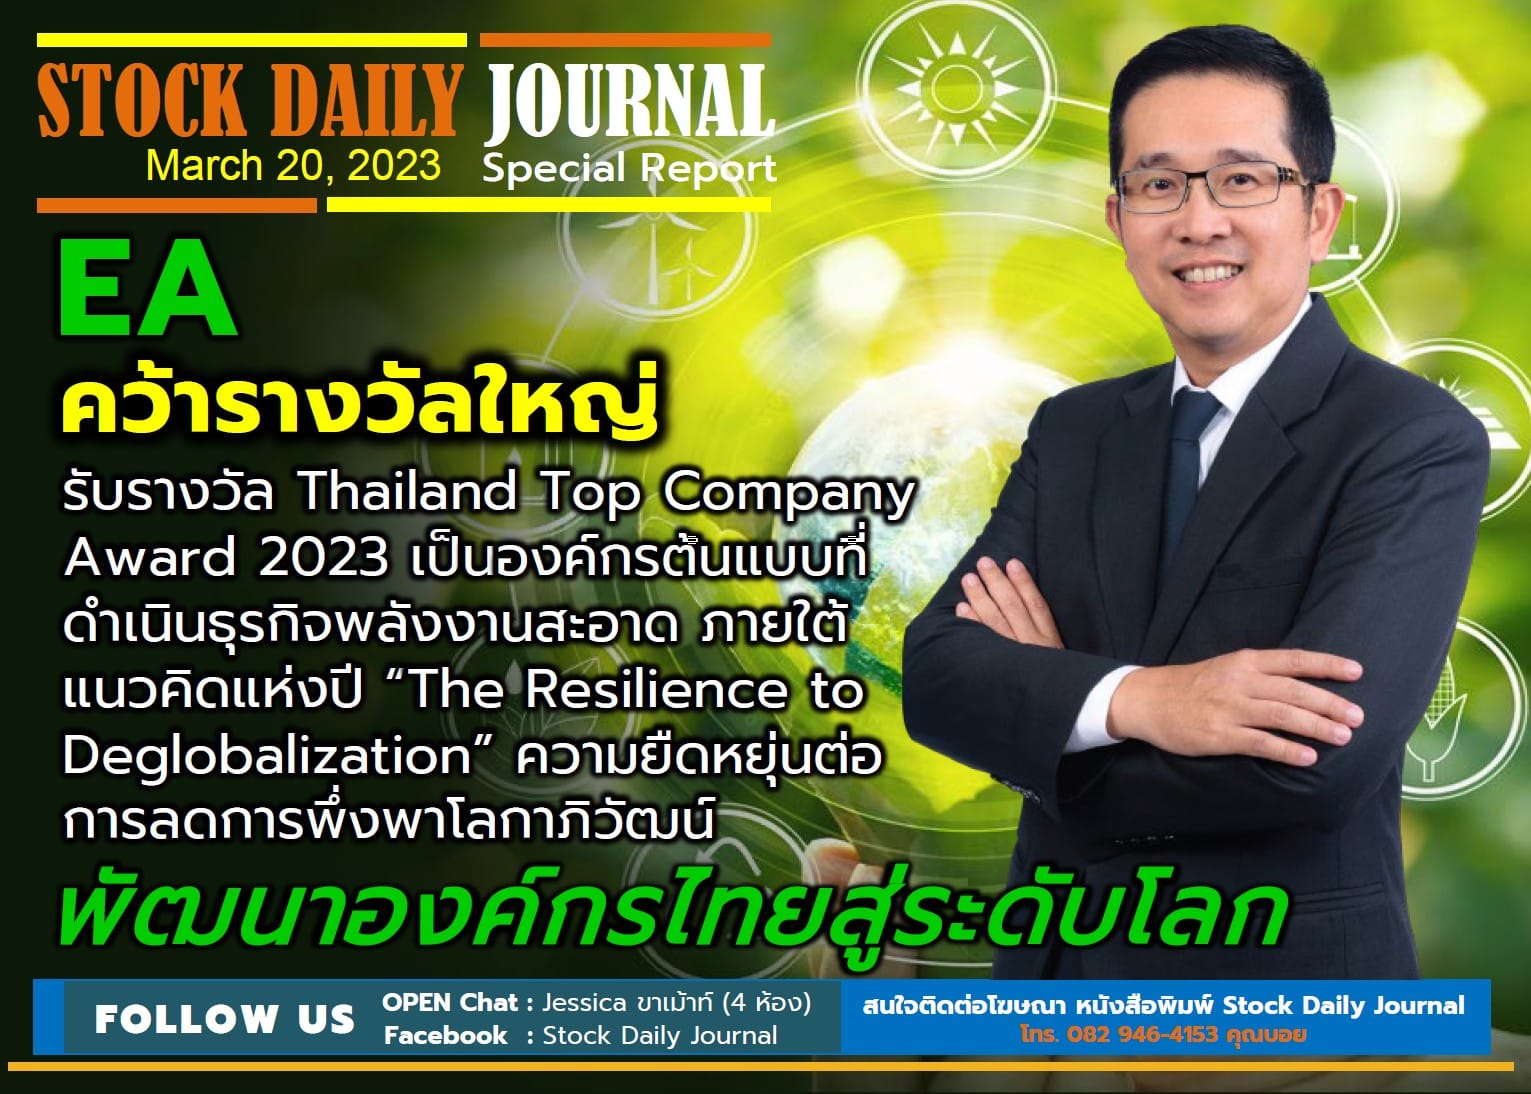 STOCK DAILY JOURNAL “Special Report : EA”